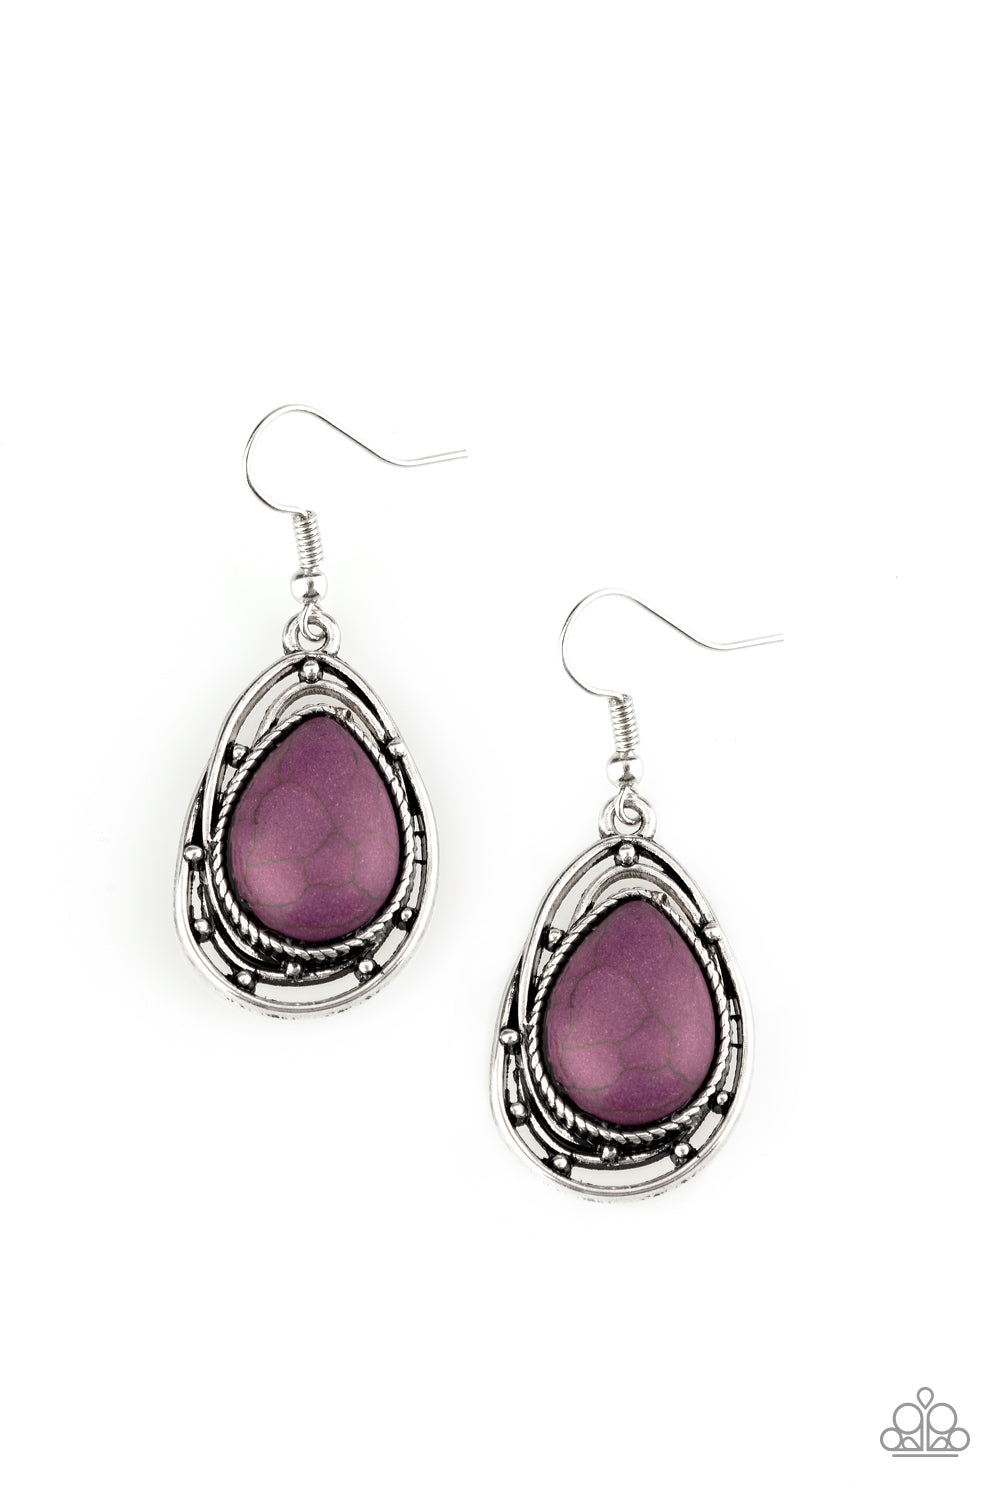 Abstract Anthropology-Purple Earrings